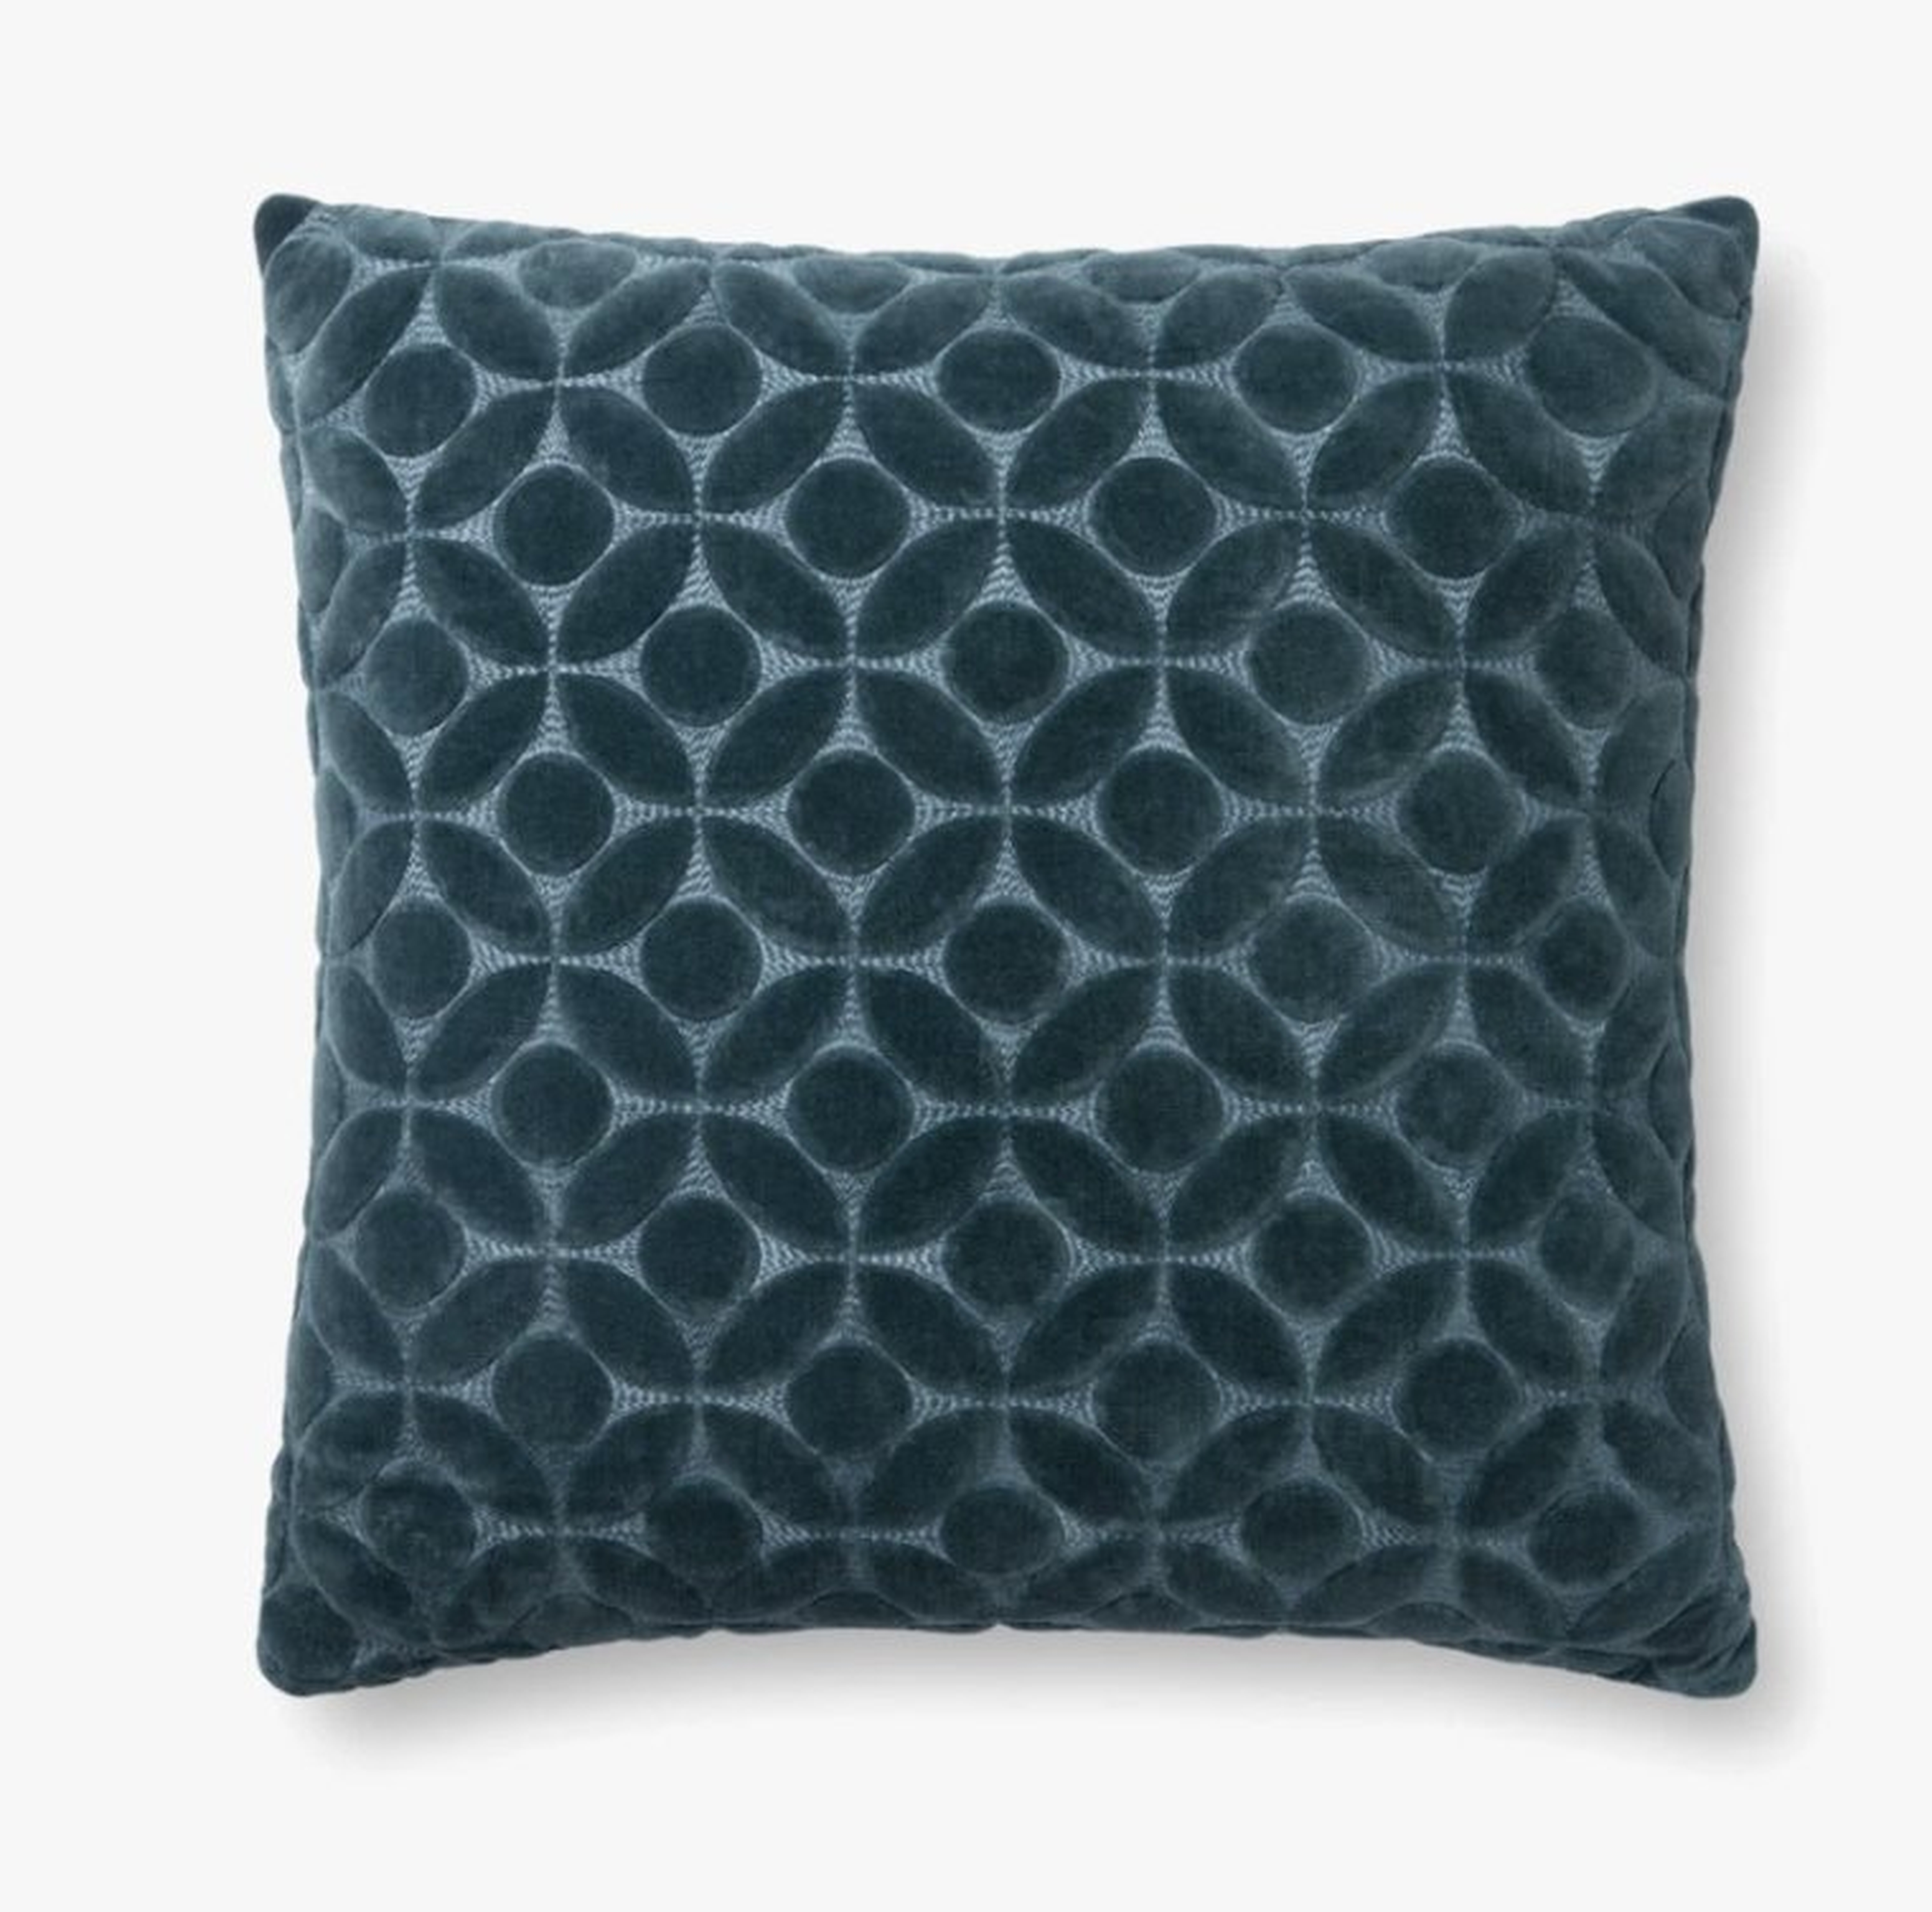 P0864 Teal, 22" Pillow Cover - Loloi Rugs